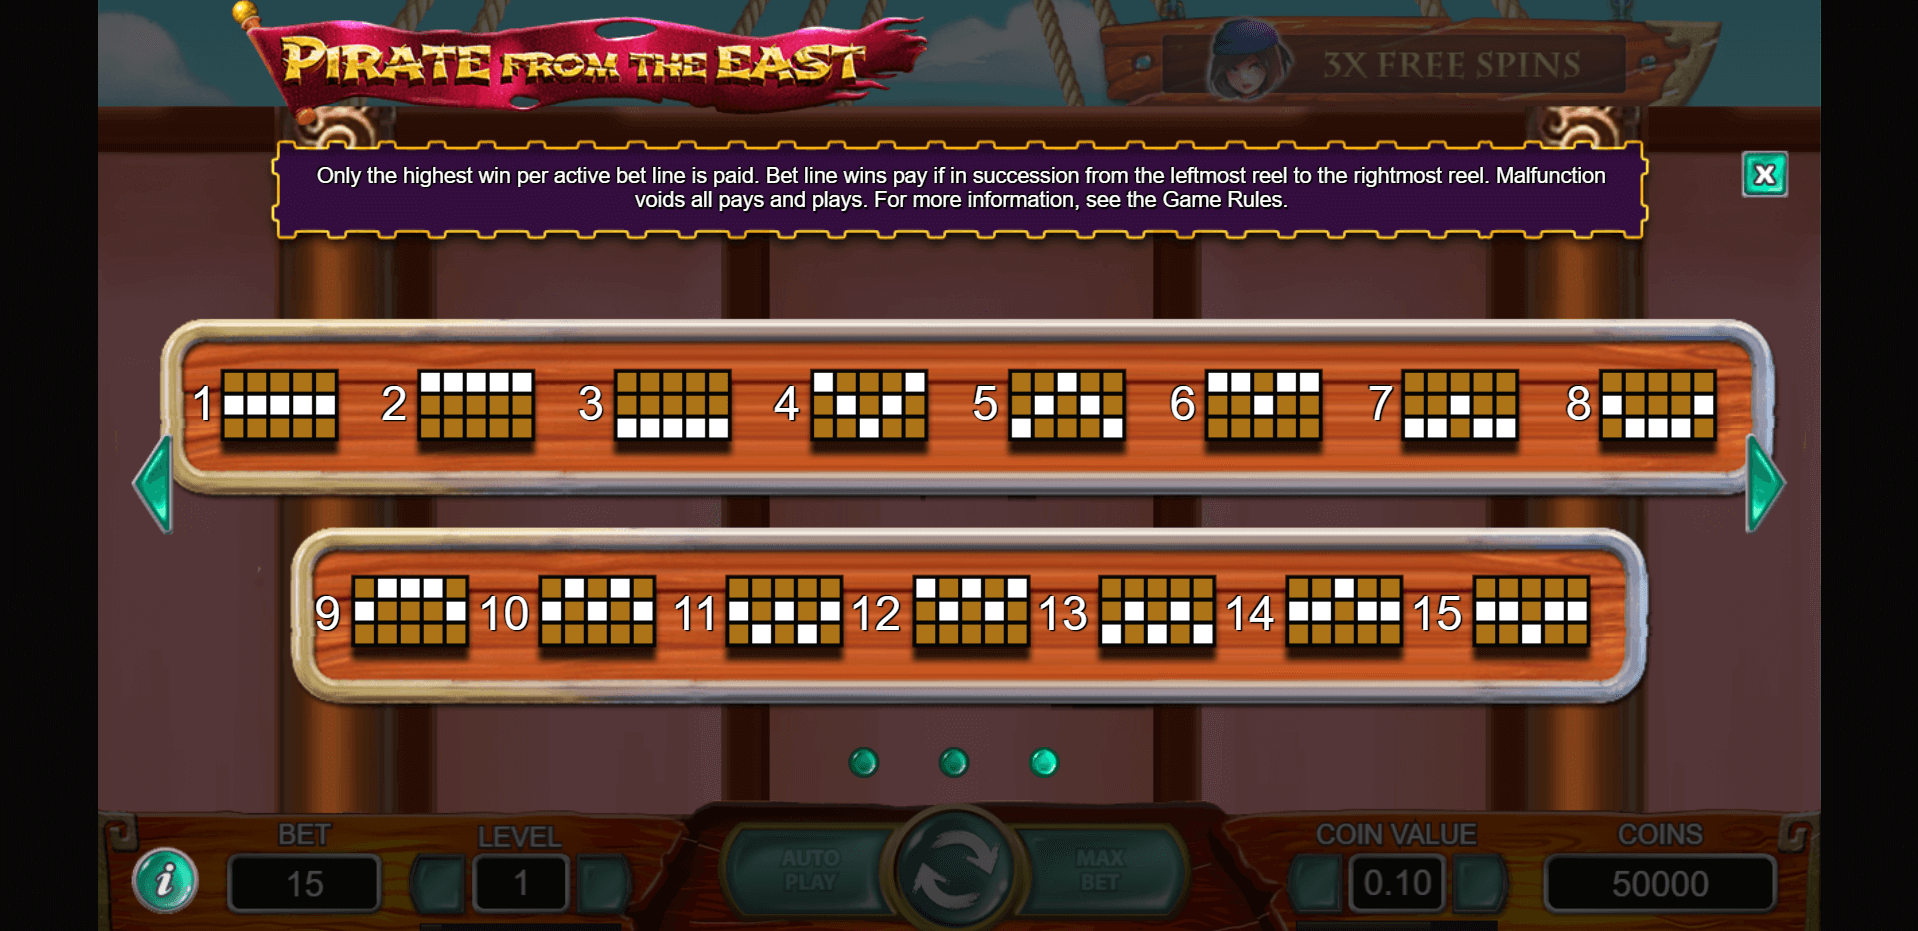 pirate from the east slot machine detail image 2